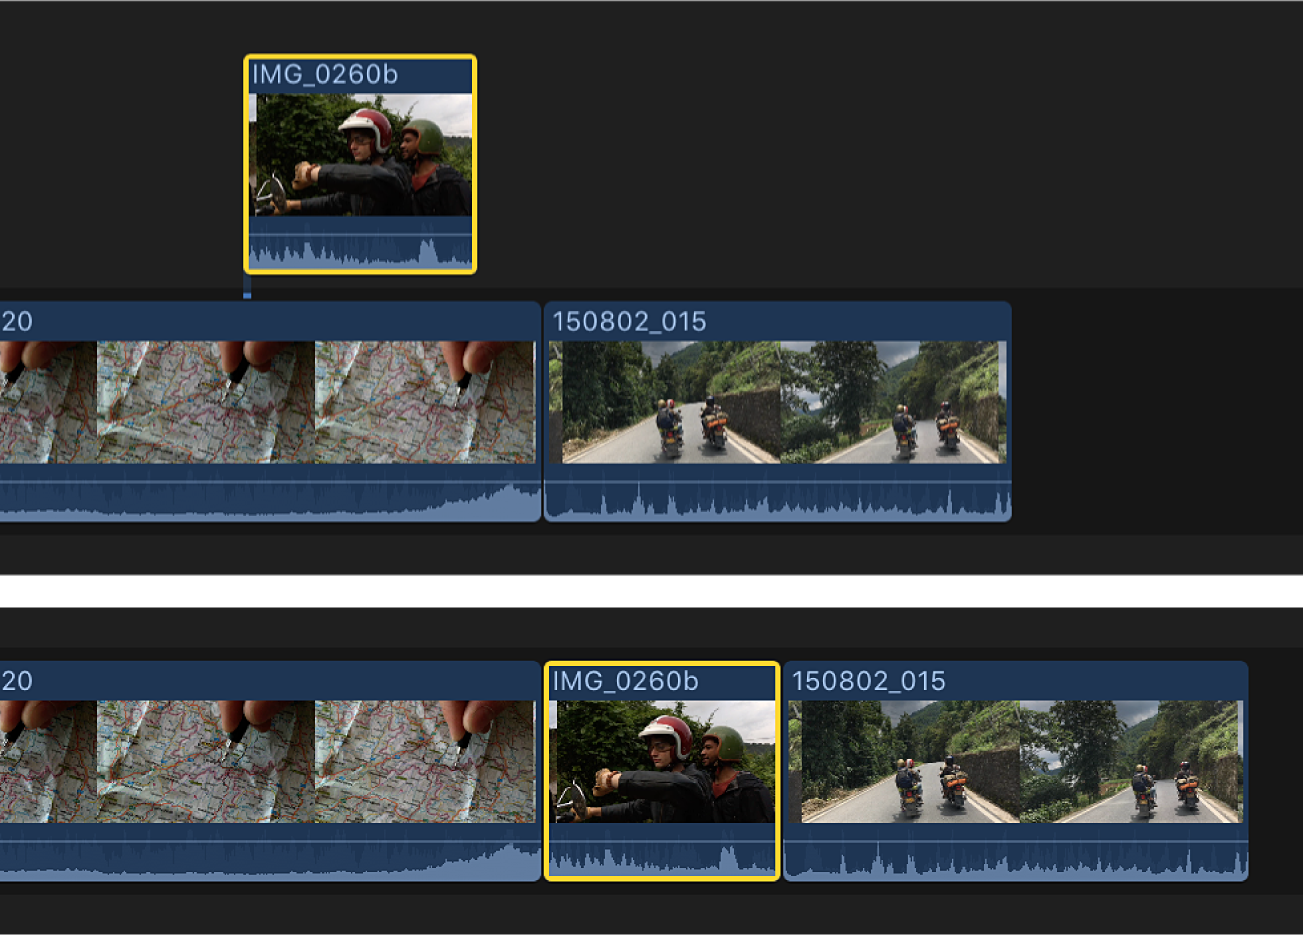 A connected clip in the timeline being inserted between clips in the primary storyline, causing clips after it in the primary storyline to ripple right